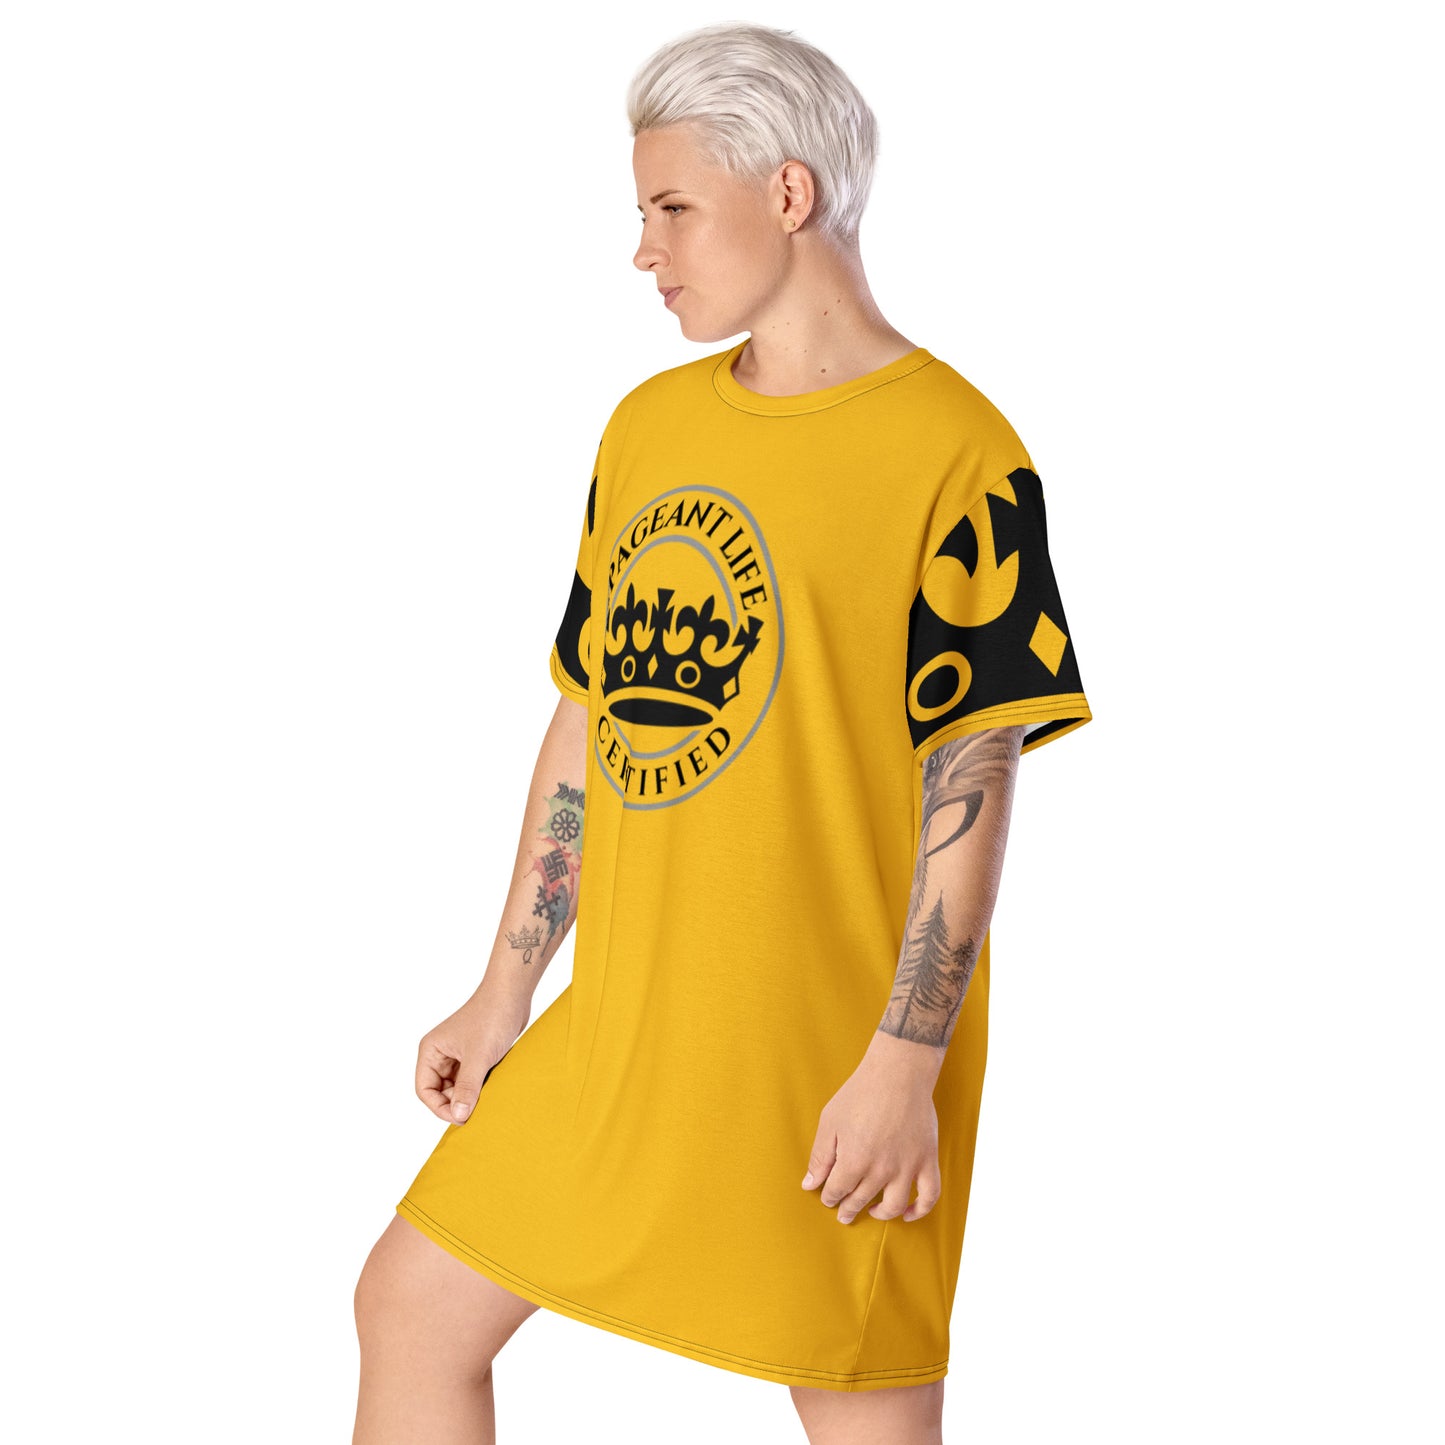 Black and Yellow Pageant Life Certified T-shirt dress